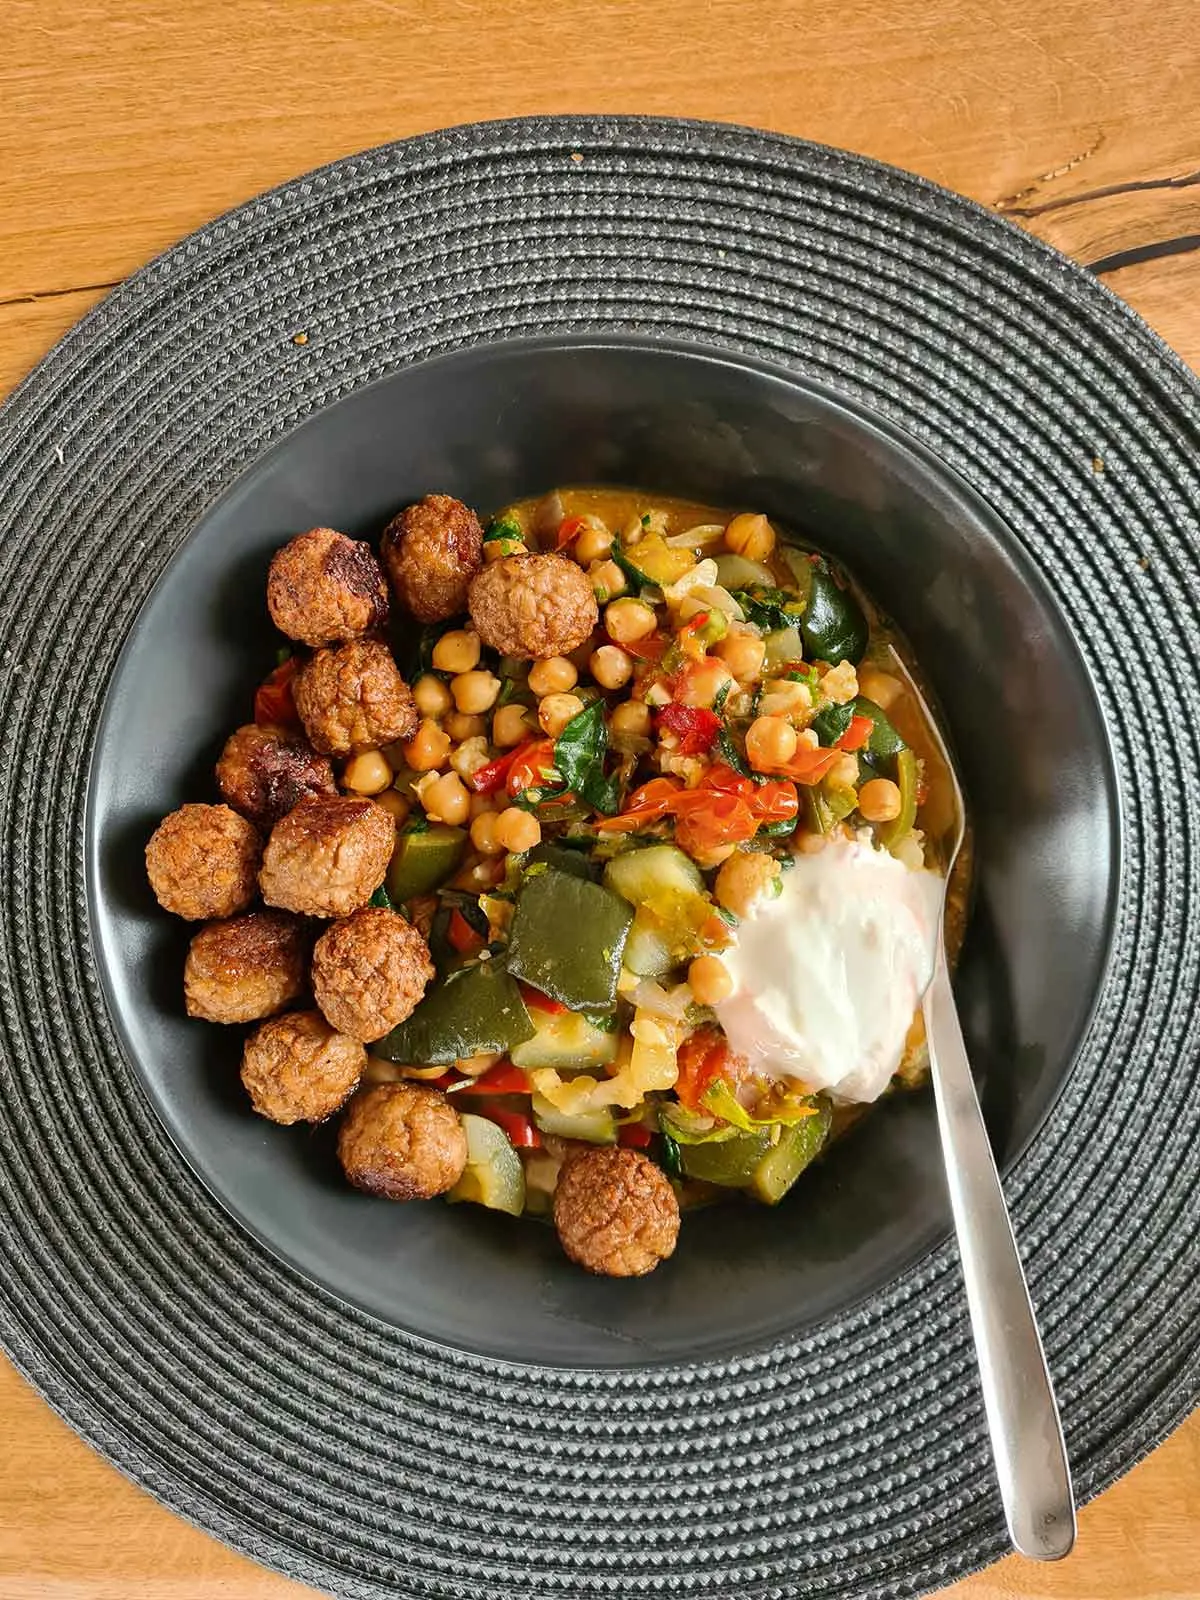 dinner veggie balls with ratatouille vegetables and chickpeas